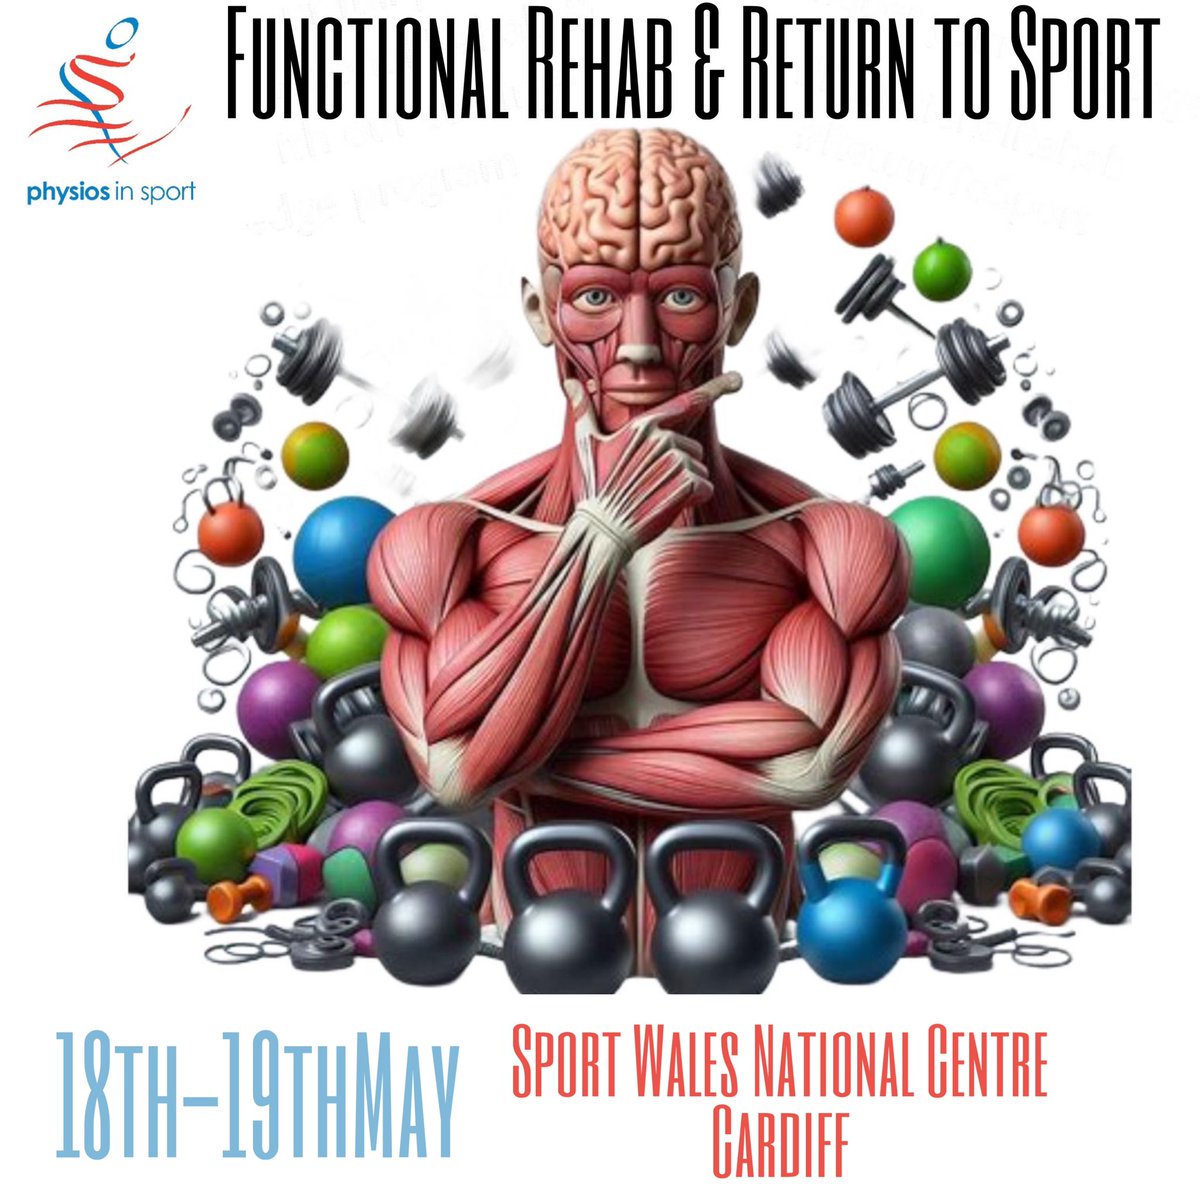 Functional Rehab Part 2: Cardiff Use reasoning to plan and manage rehabilitation programmes across a wide range of sports and conditions Unlock your full potential with this cutting edge programme! Part 1 Online bit.ly/FunctionalReha… #ReturnToSport #FunctionalRehab